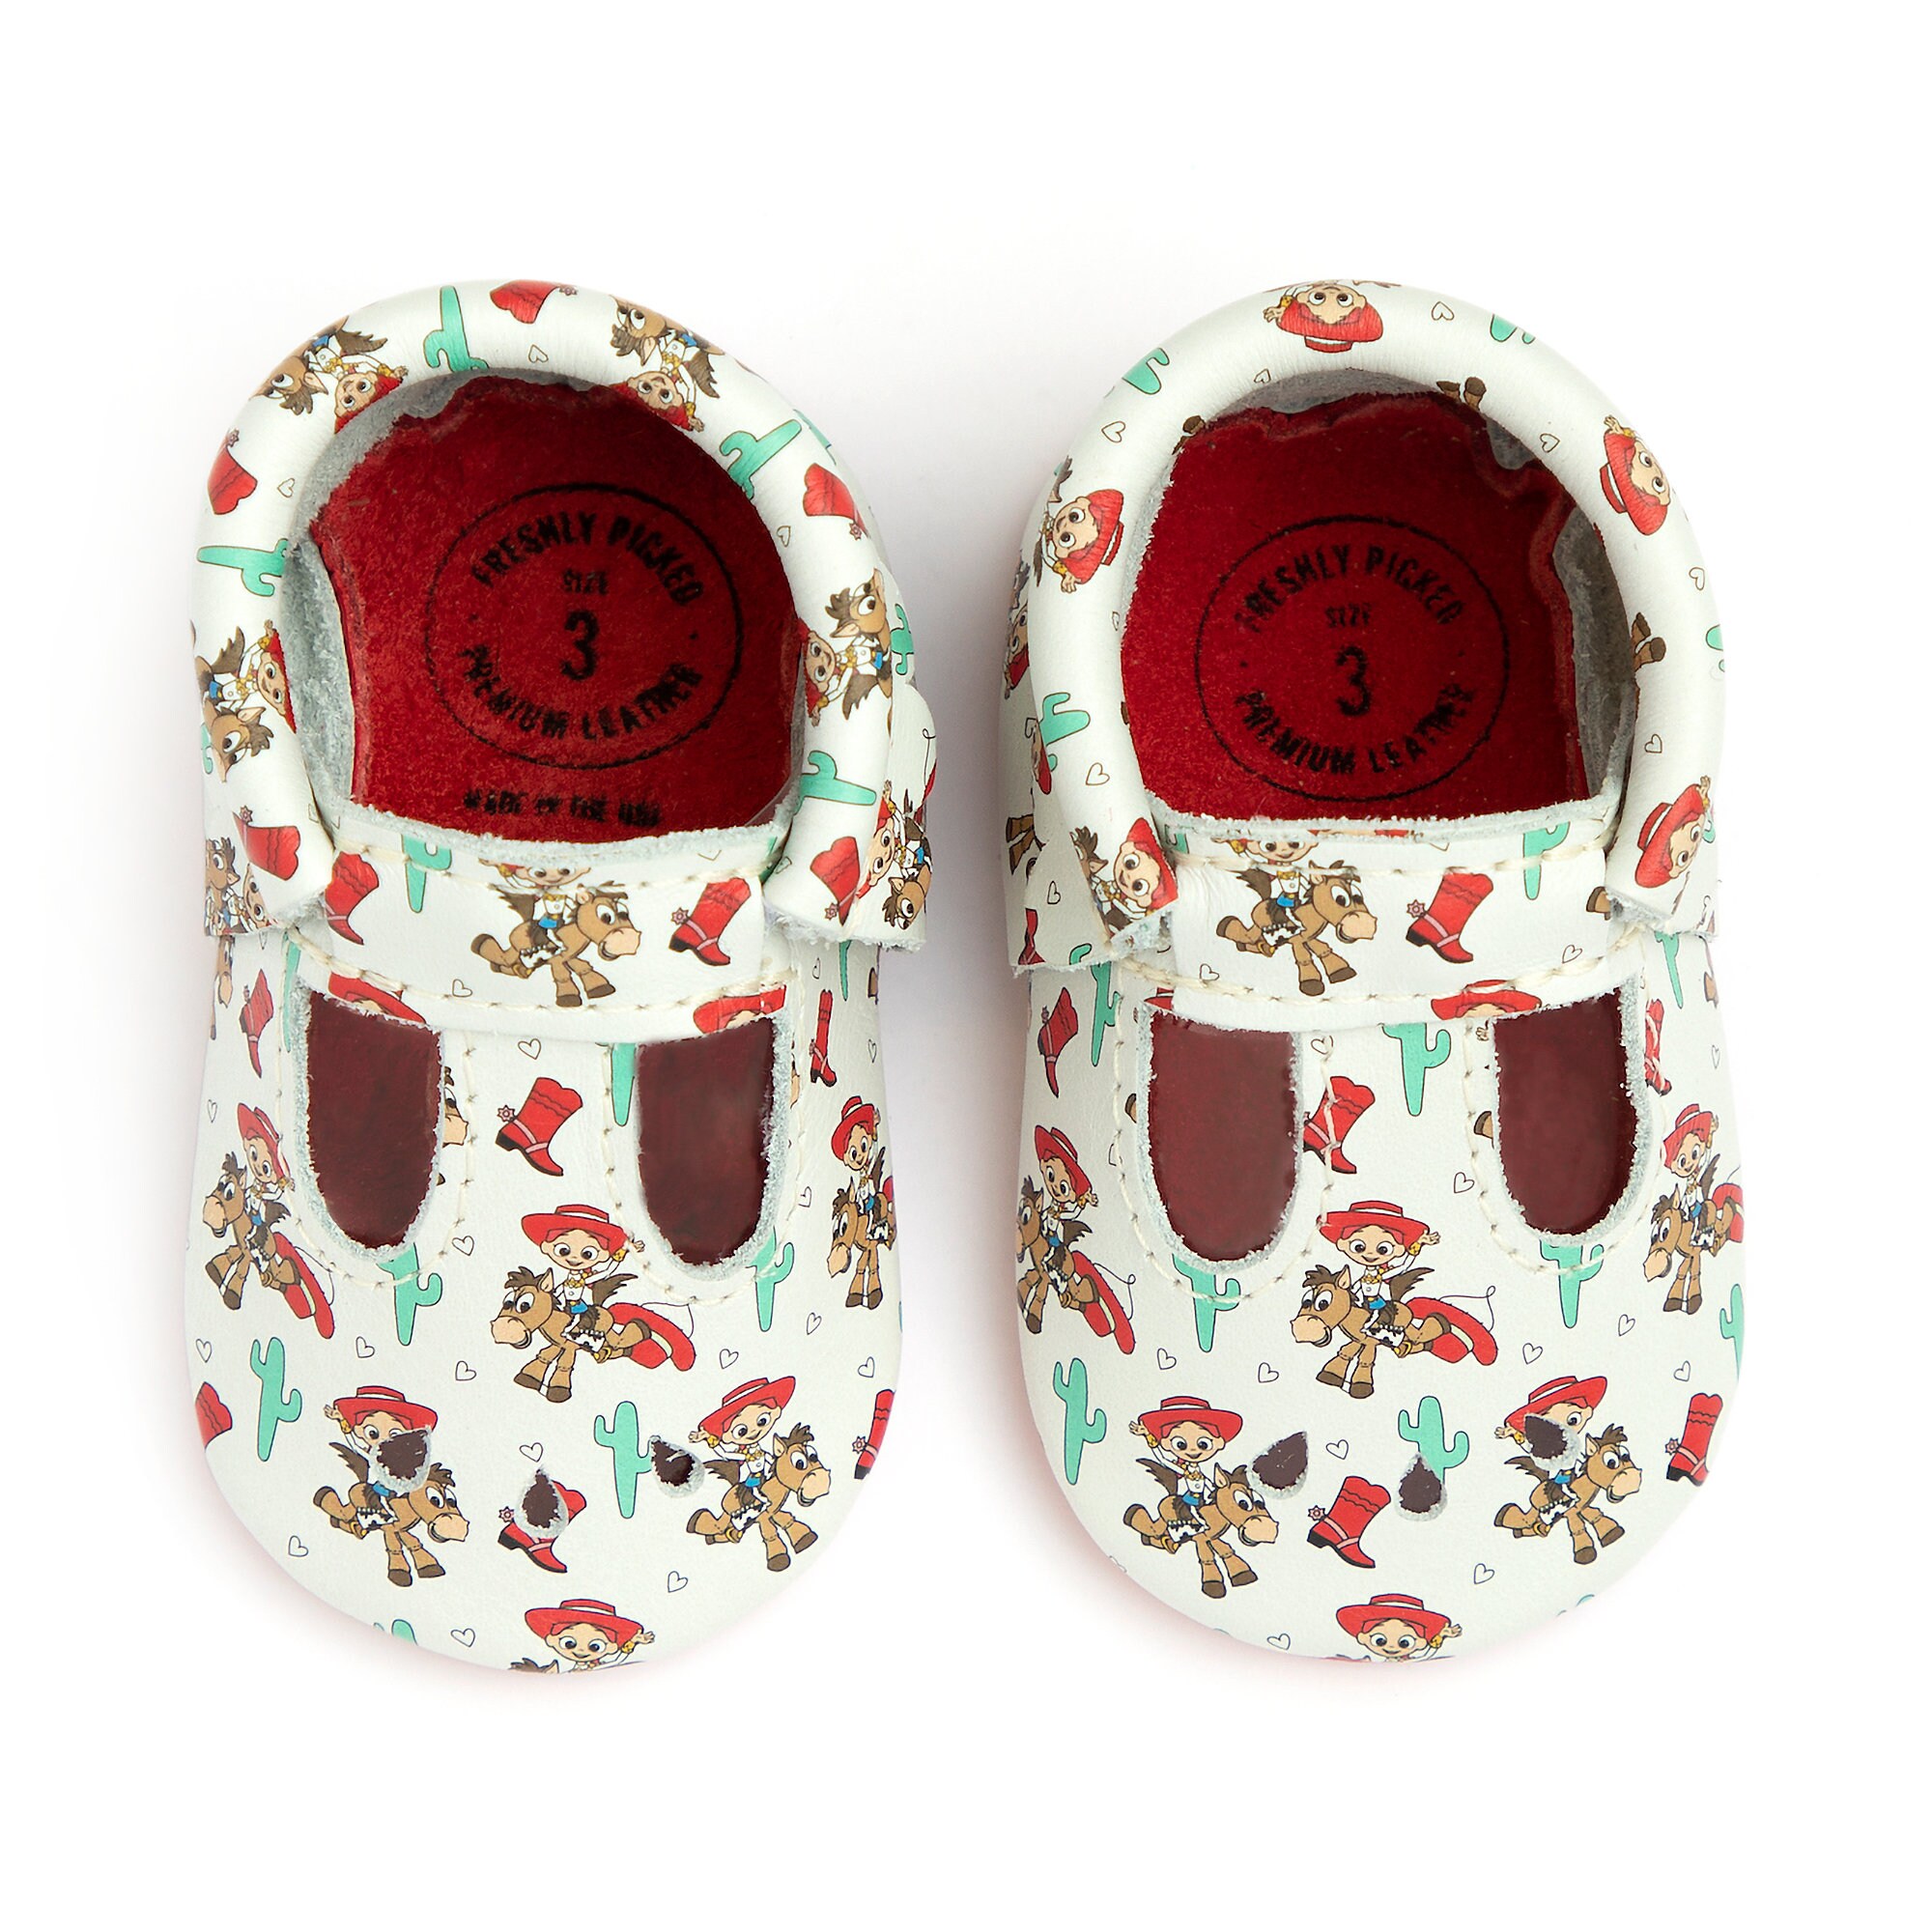 Jessie and Bullseye Mary Jane Moccasins for Baby by Freshly Picked